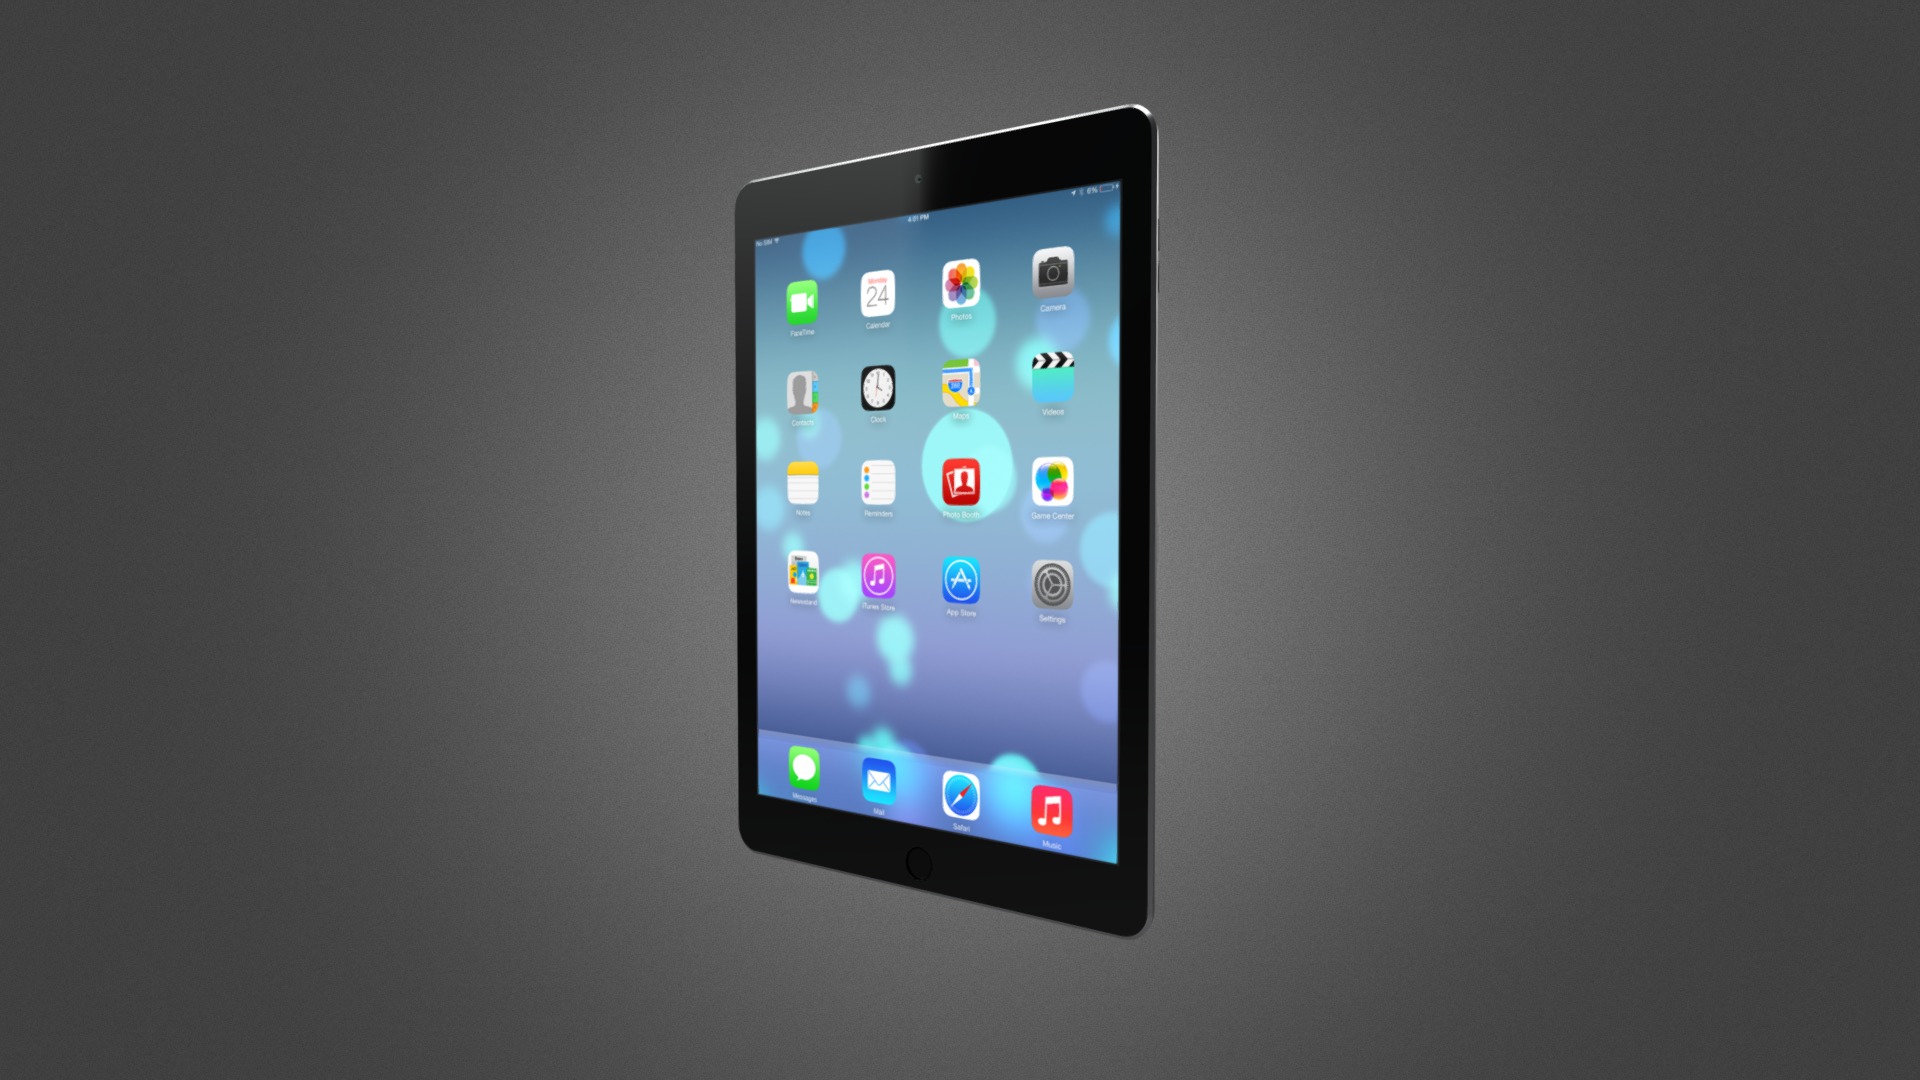 3D model Apple iPad Air 2 for Element 3D - This is a 3D model of the Apple iPad Air 2 for Element 3D. The 3D model is about a black smartphone with a blue screen.